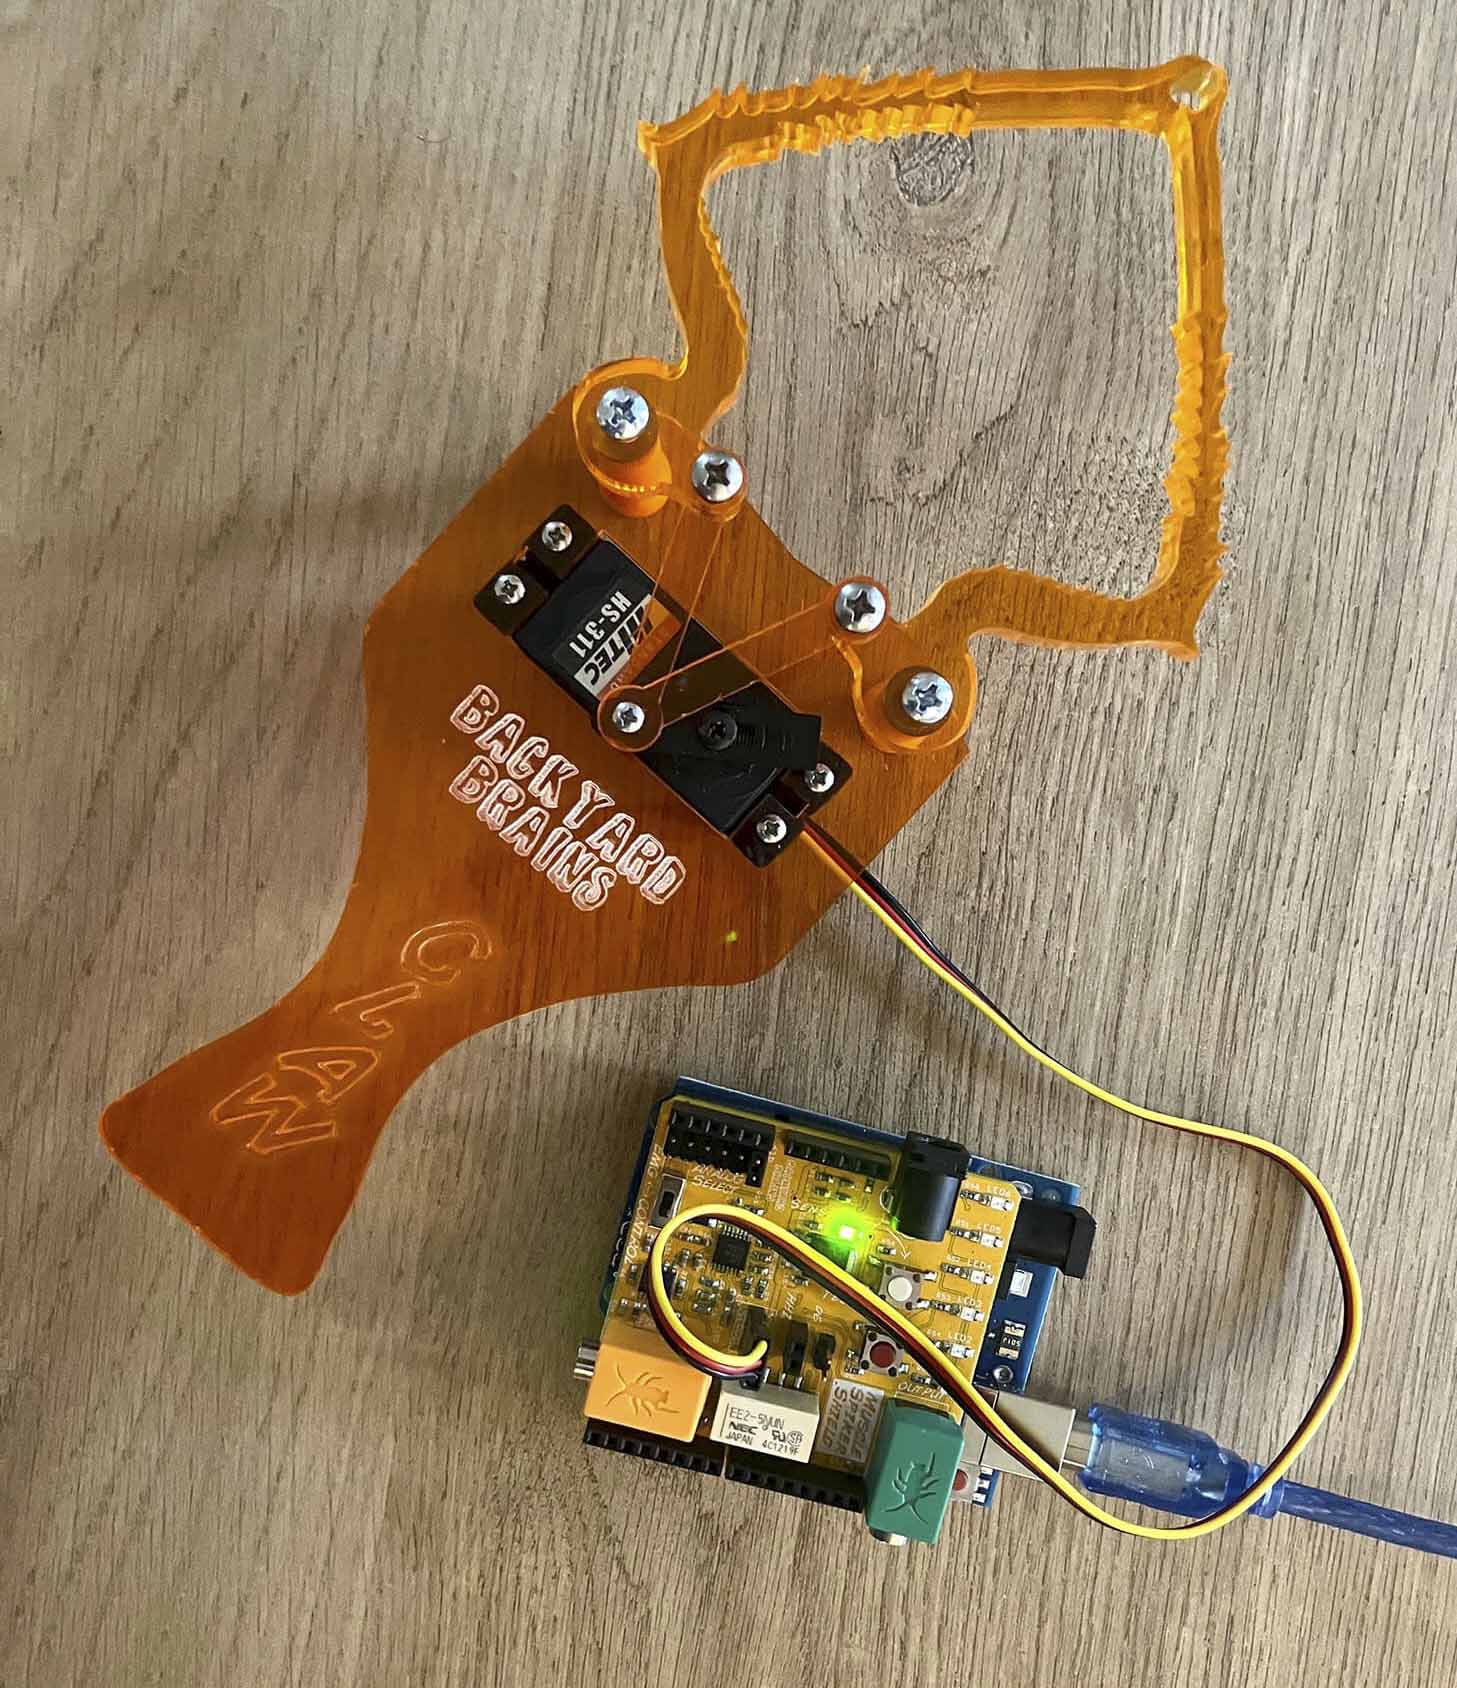 The Backyard Brains Claw and Muscle Spiker connect to an Arduino microcontroller.